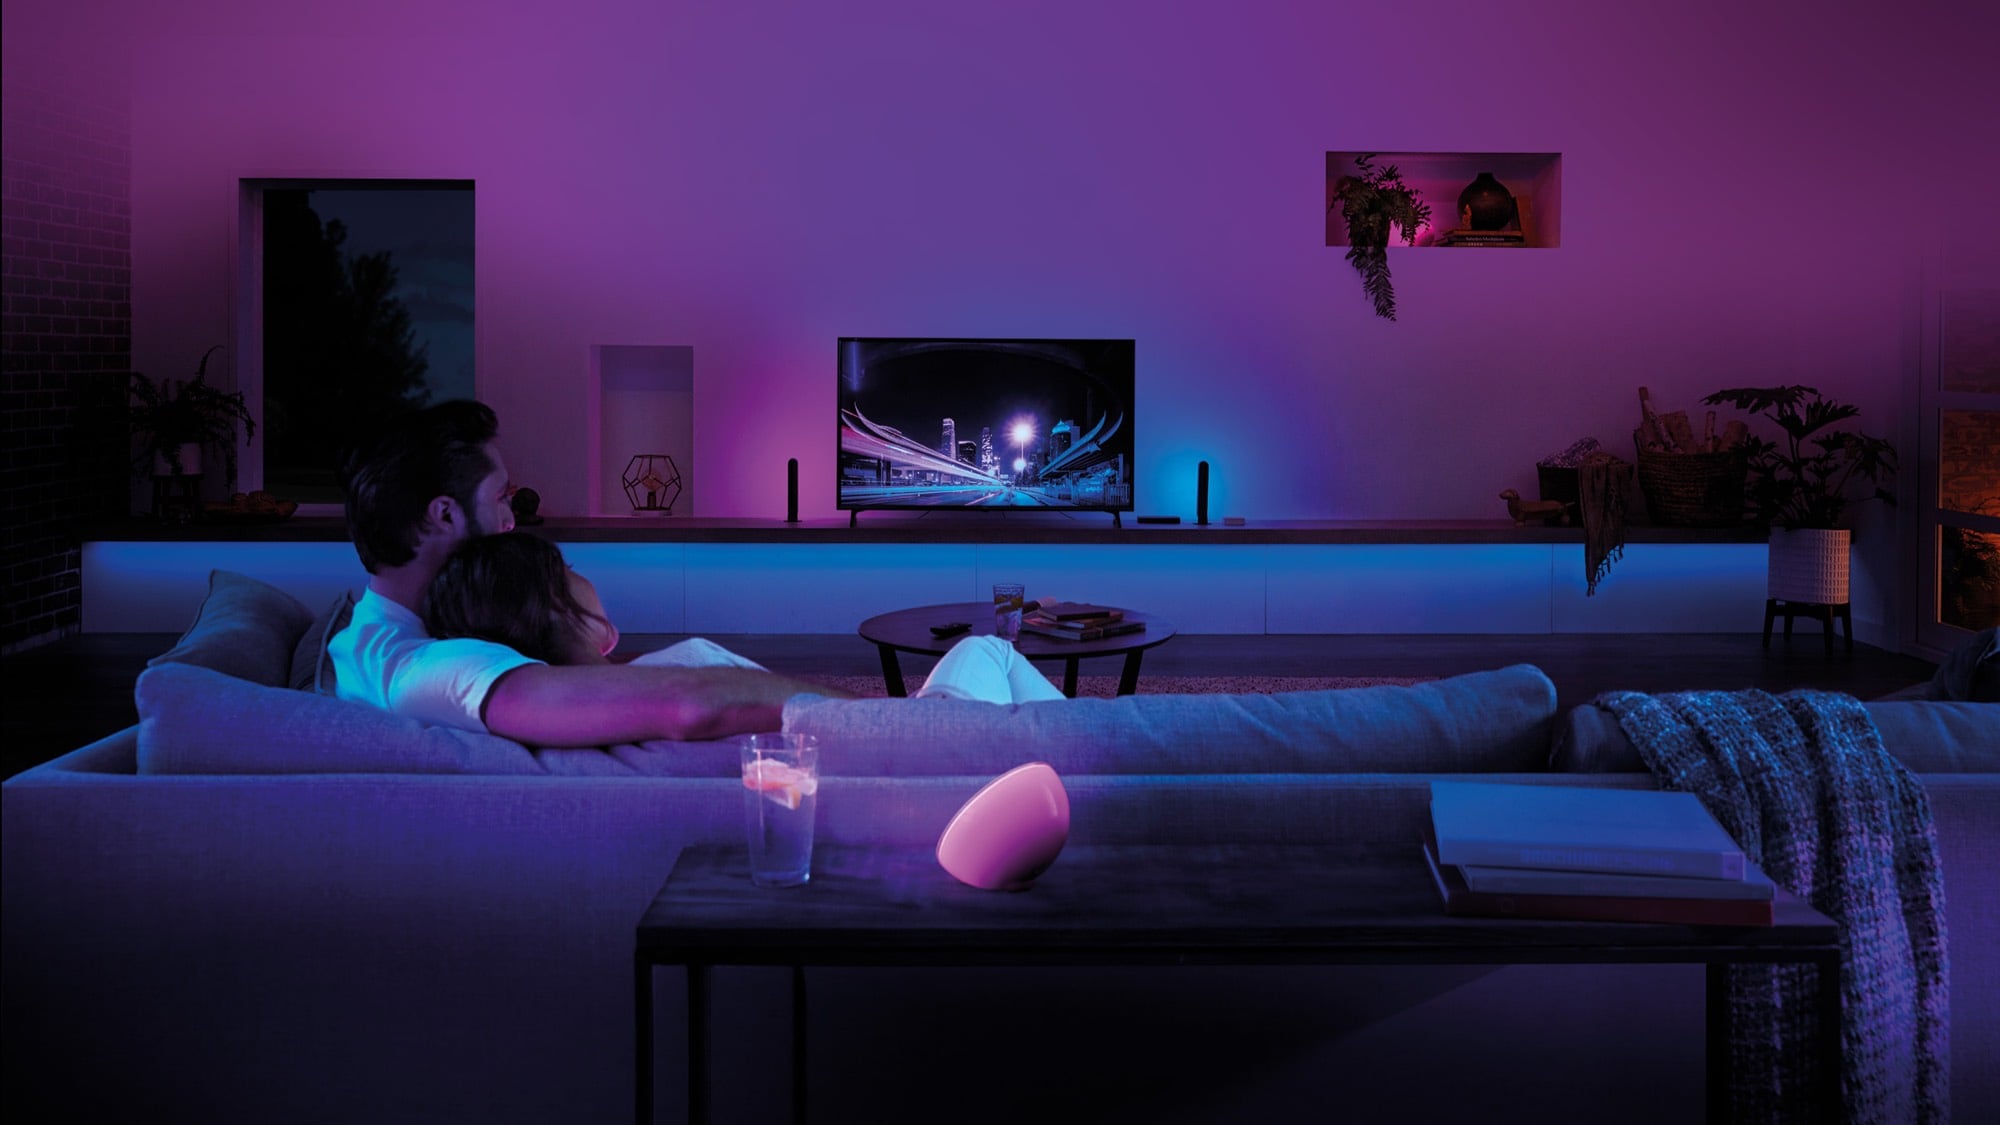 https://www.philips-hue.com/content/dam/hue/masters/explore-hue/propositions/entertainment/sync-with-home-theater/sync-home-theater-16-9.jpg